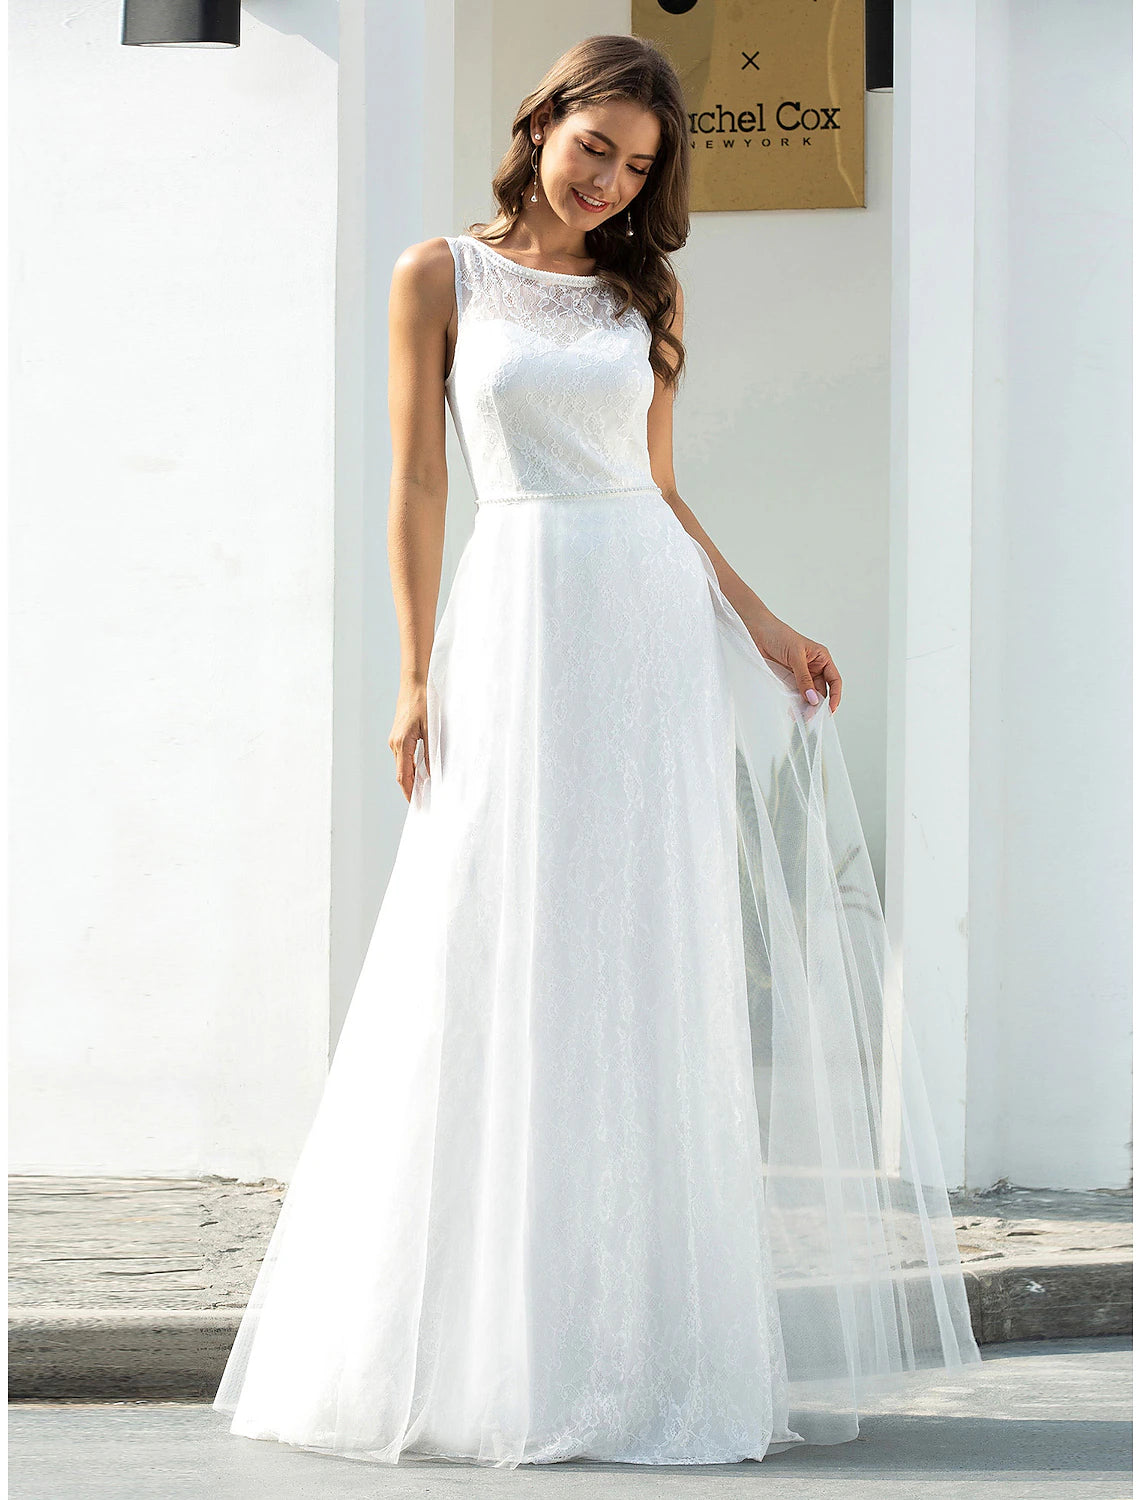 Beach Wedding Dresses A-Line Scoop Neck Sleeveless Floor Length Lace Bridal Gowns With Lace